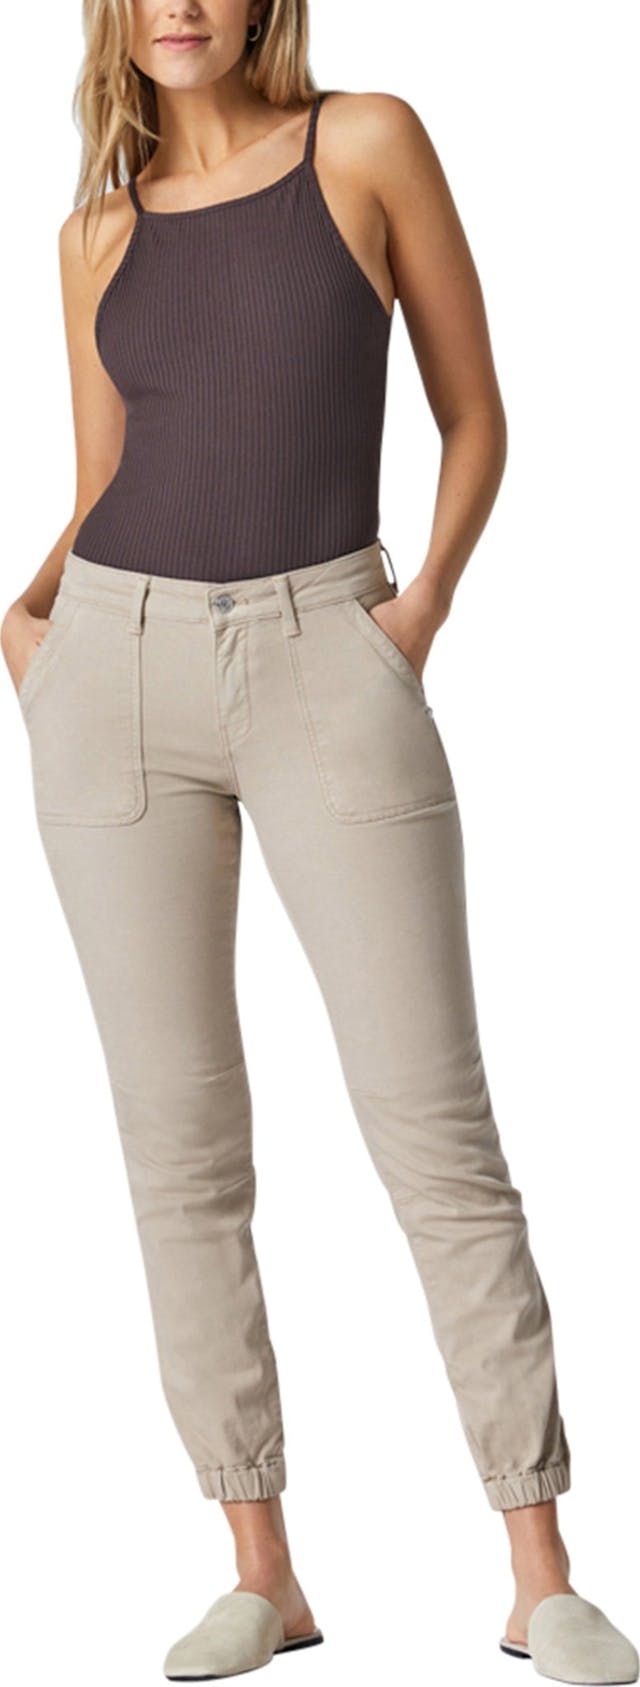 Product image for Ivy Slim Fit Cargo Pants - Women's